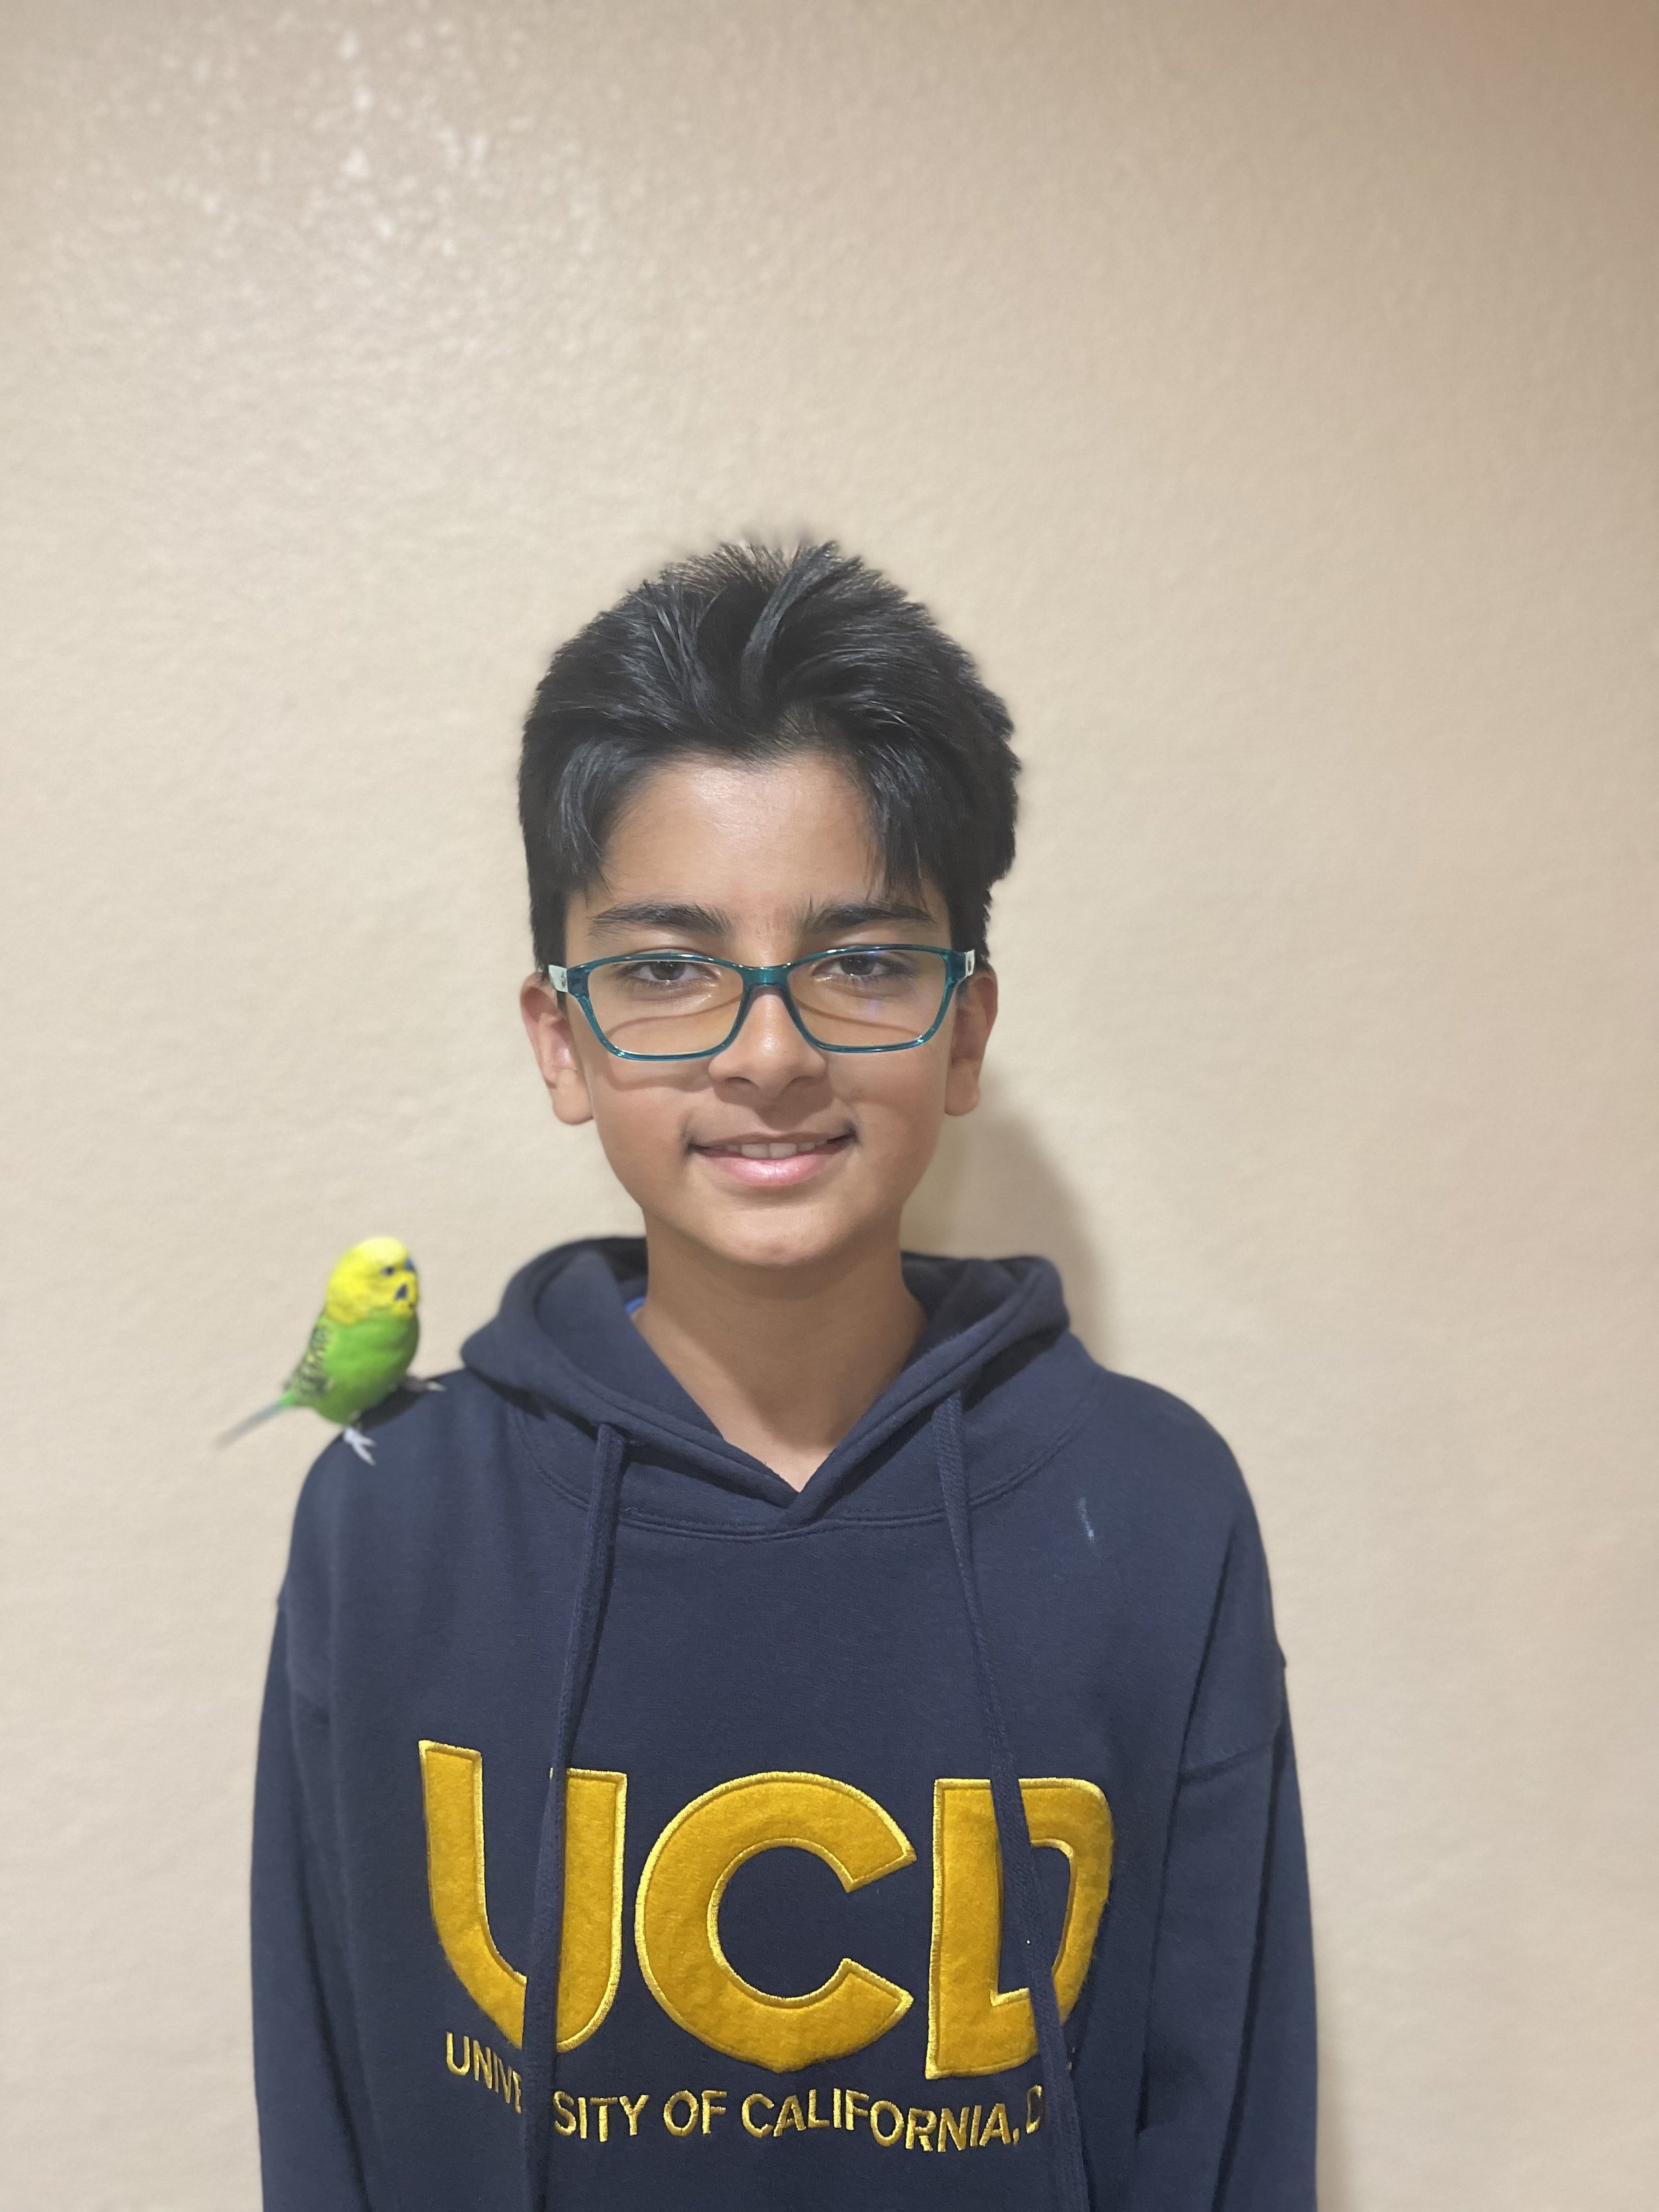  Hey Hornets! My name is Azaan Bodla and I will be a part of the Sales and Technology commission. Some hobbies of mine are playing basketball, video games, and reading. I love being at Horner and spending time having fun with my friends and peers. As